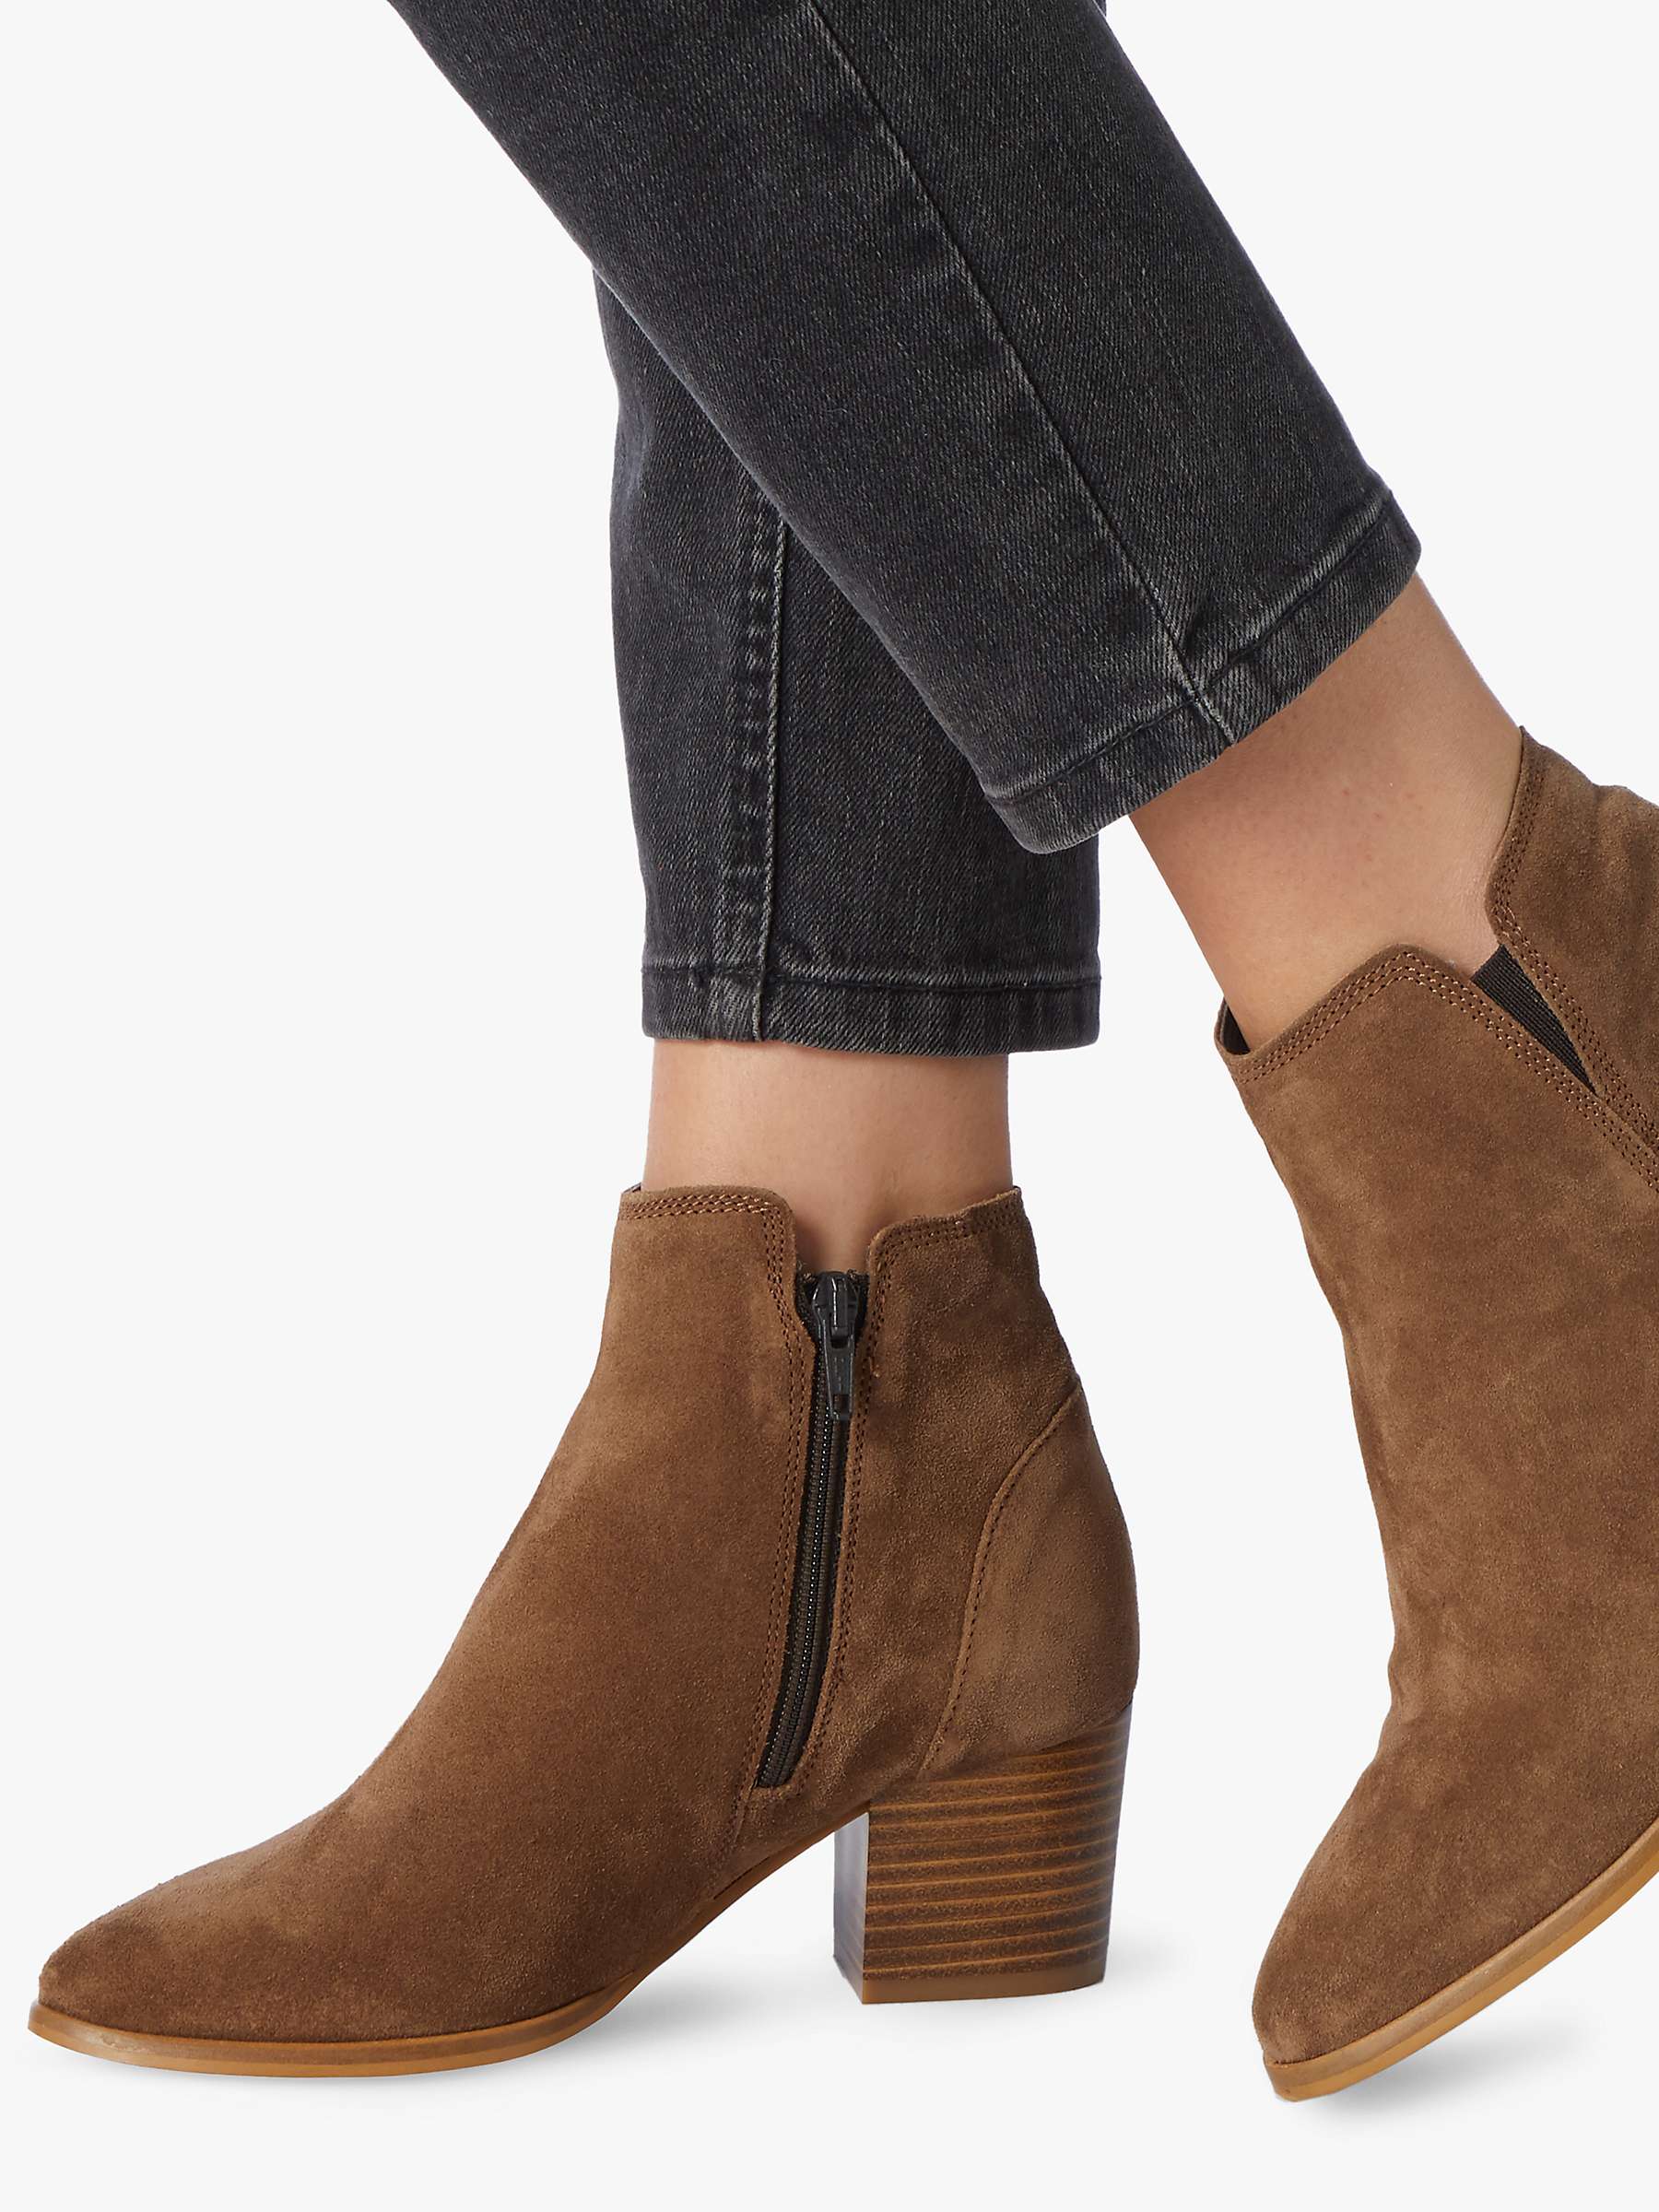 Dune Payge Suede Mid Block Heel Ankle Boots, Taupe at John Lewis & Partners